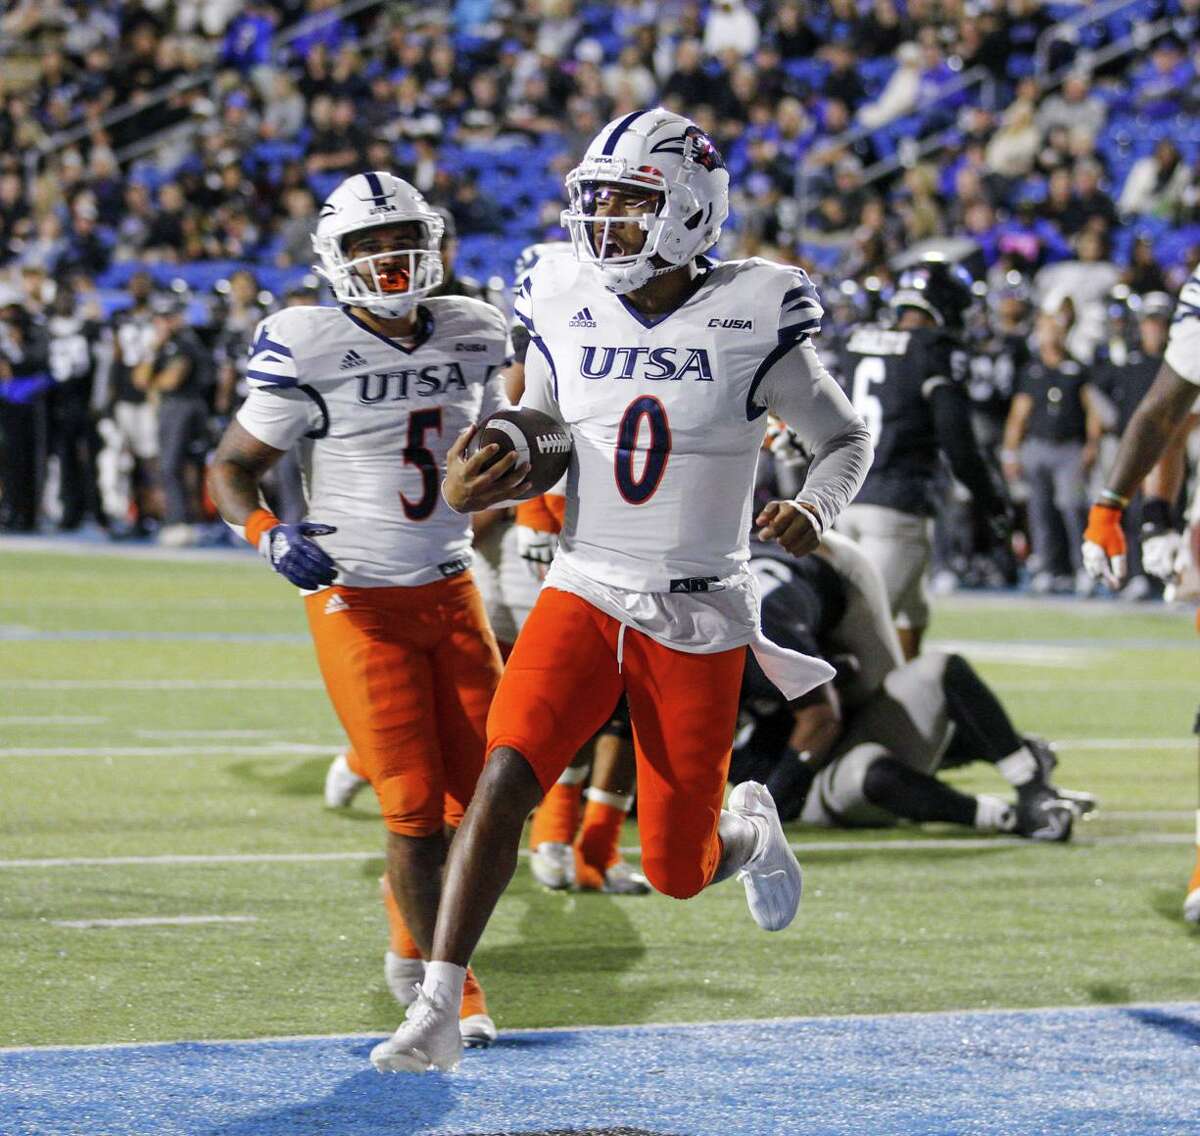 UTSA quarterback Frank Harris threw for a single-game record 414 yards with two touchdowns in the victory against Middle Tennessee.